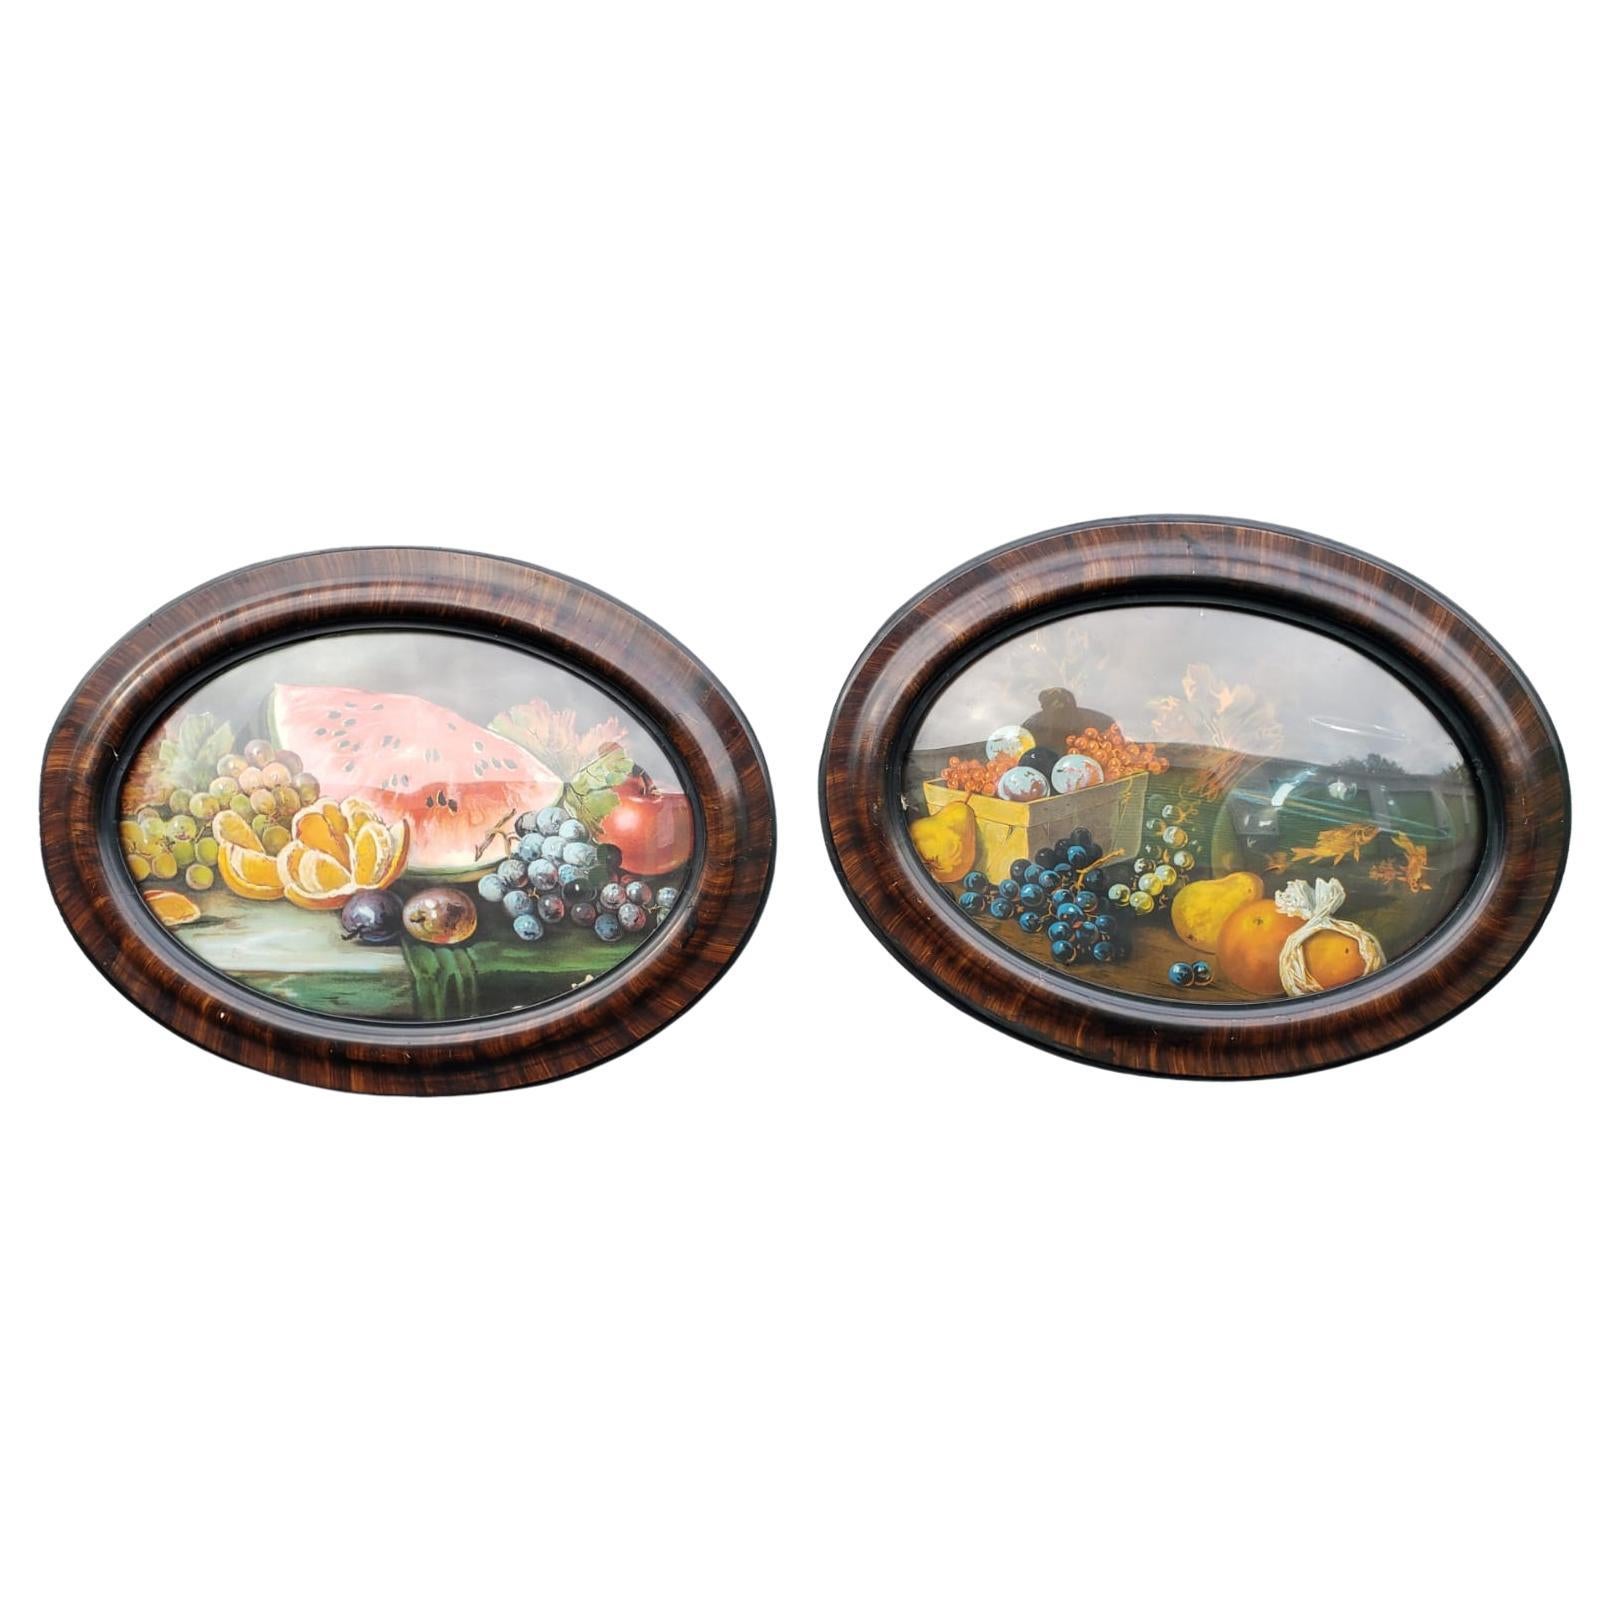 This is a nice, antique, oval tiger wood veneer frame with convex / bubble glass. Inside, is an print with various fruits.

This is a nice, solid frame, showing some typical cosmetic wear consistent with it's age. There are some relatively minor